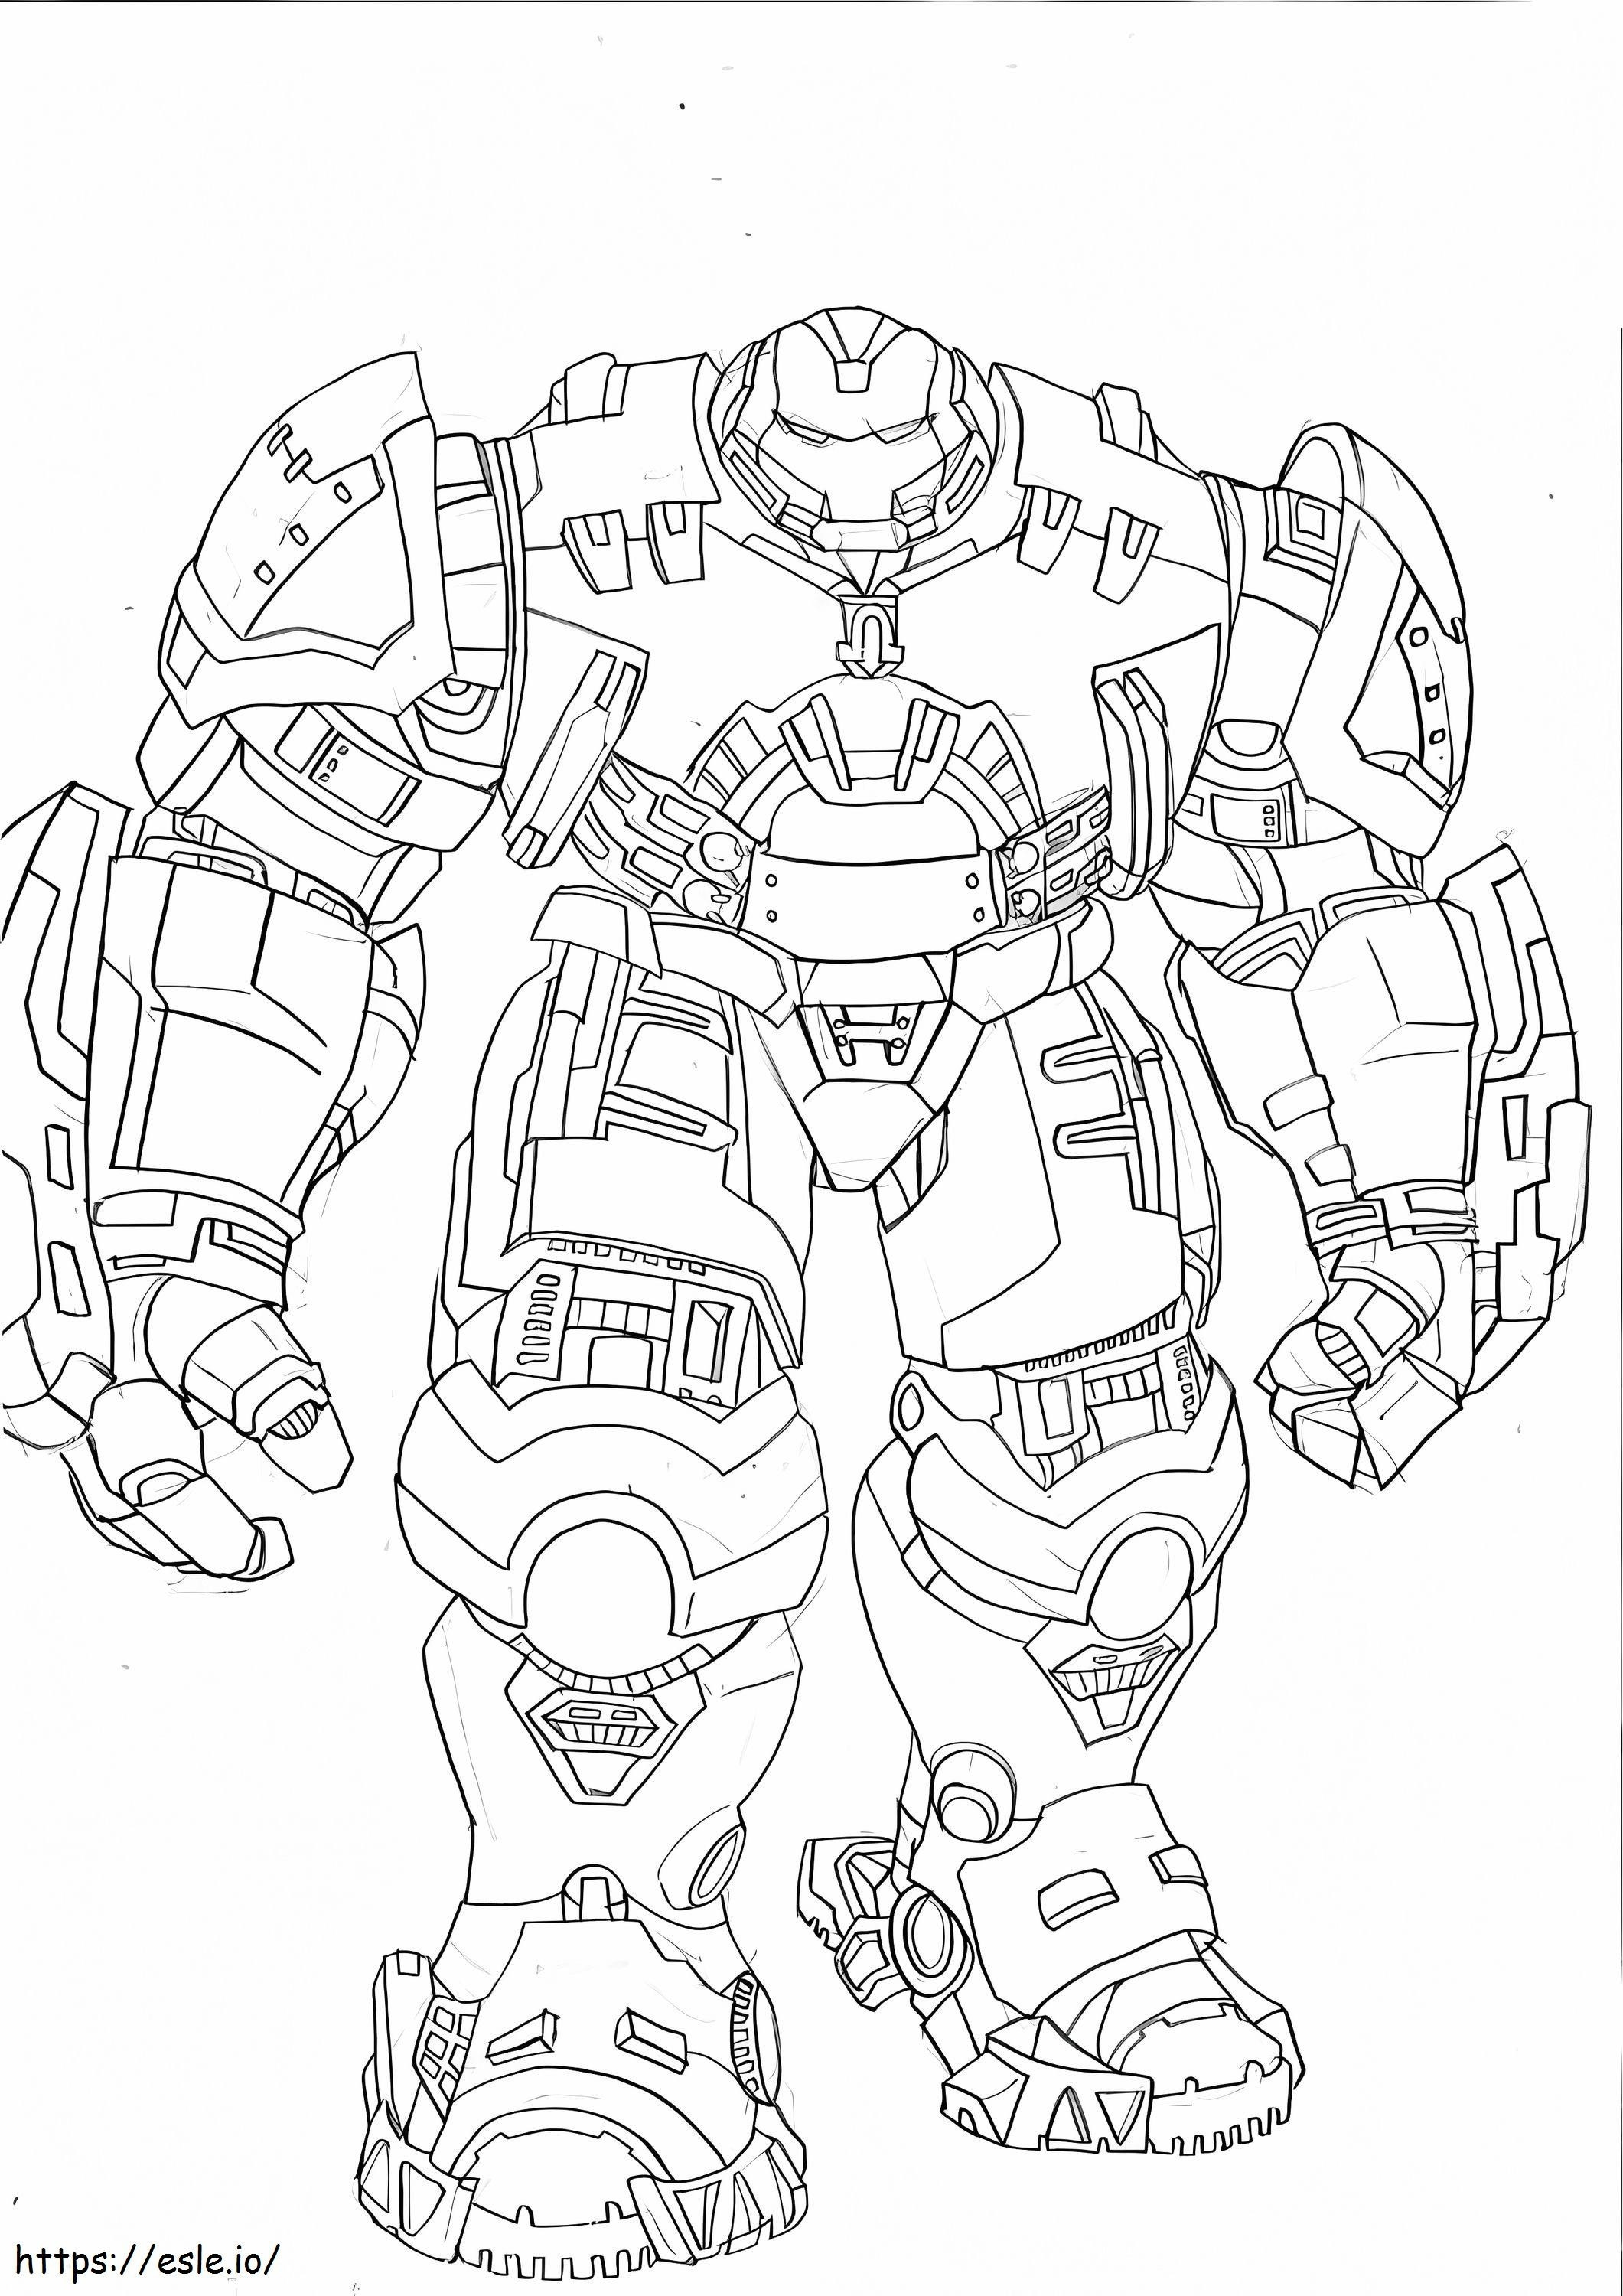 Awesome Hulkbuster coloring page